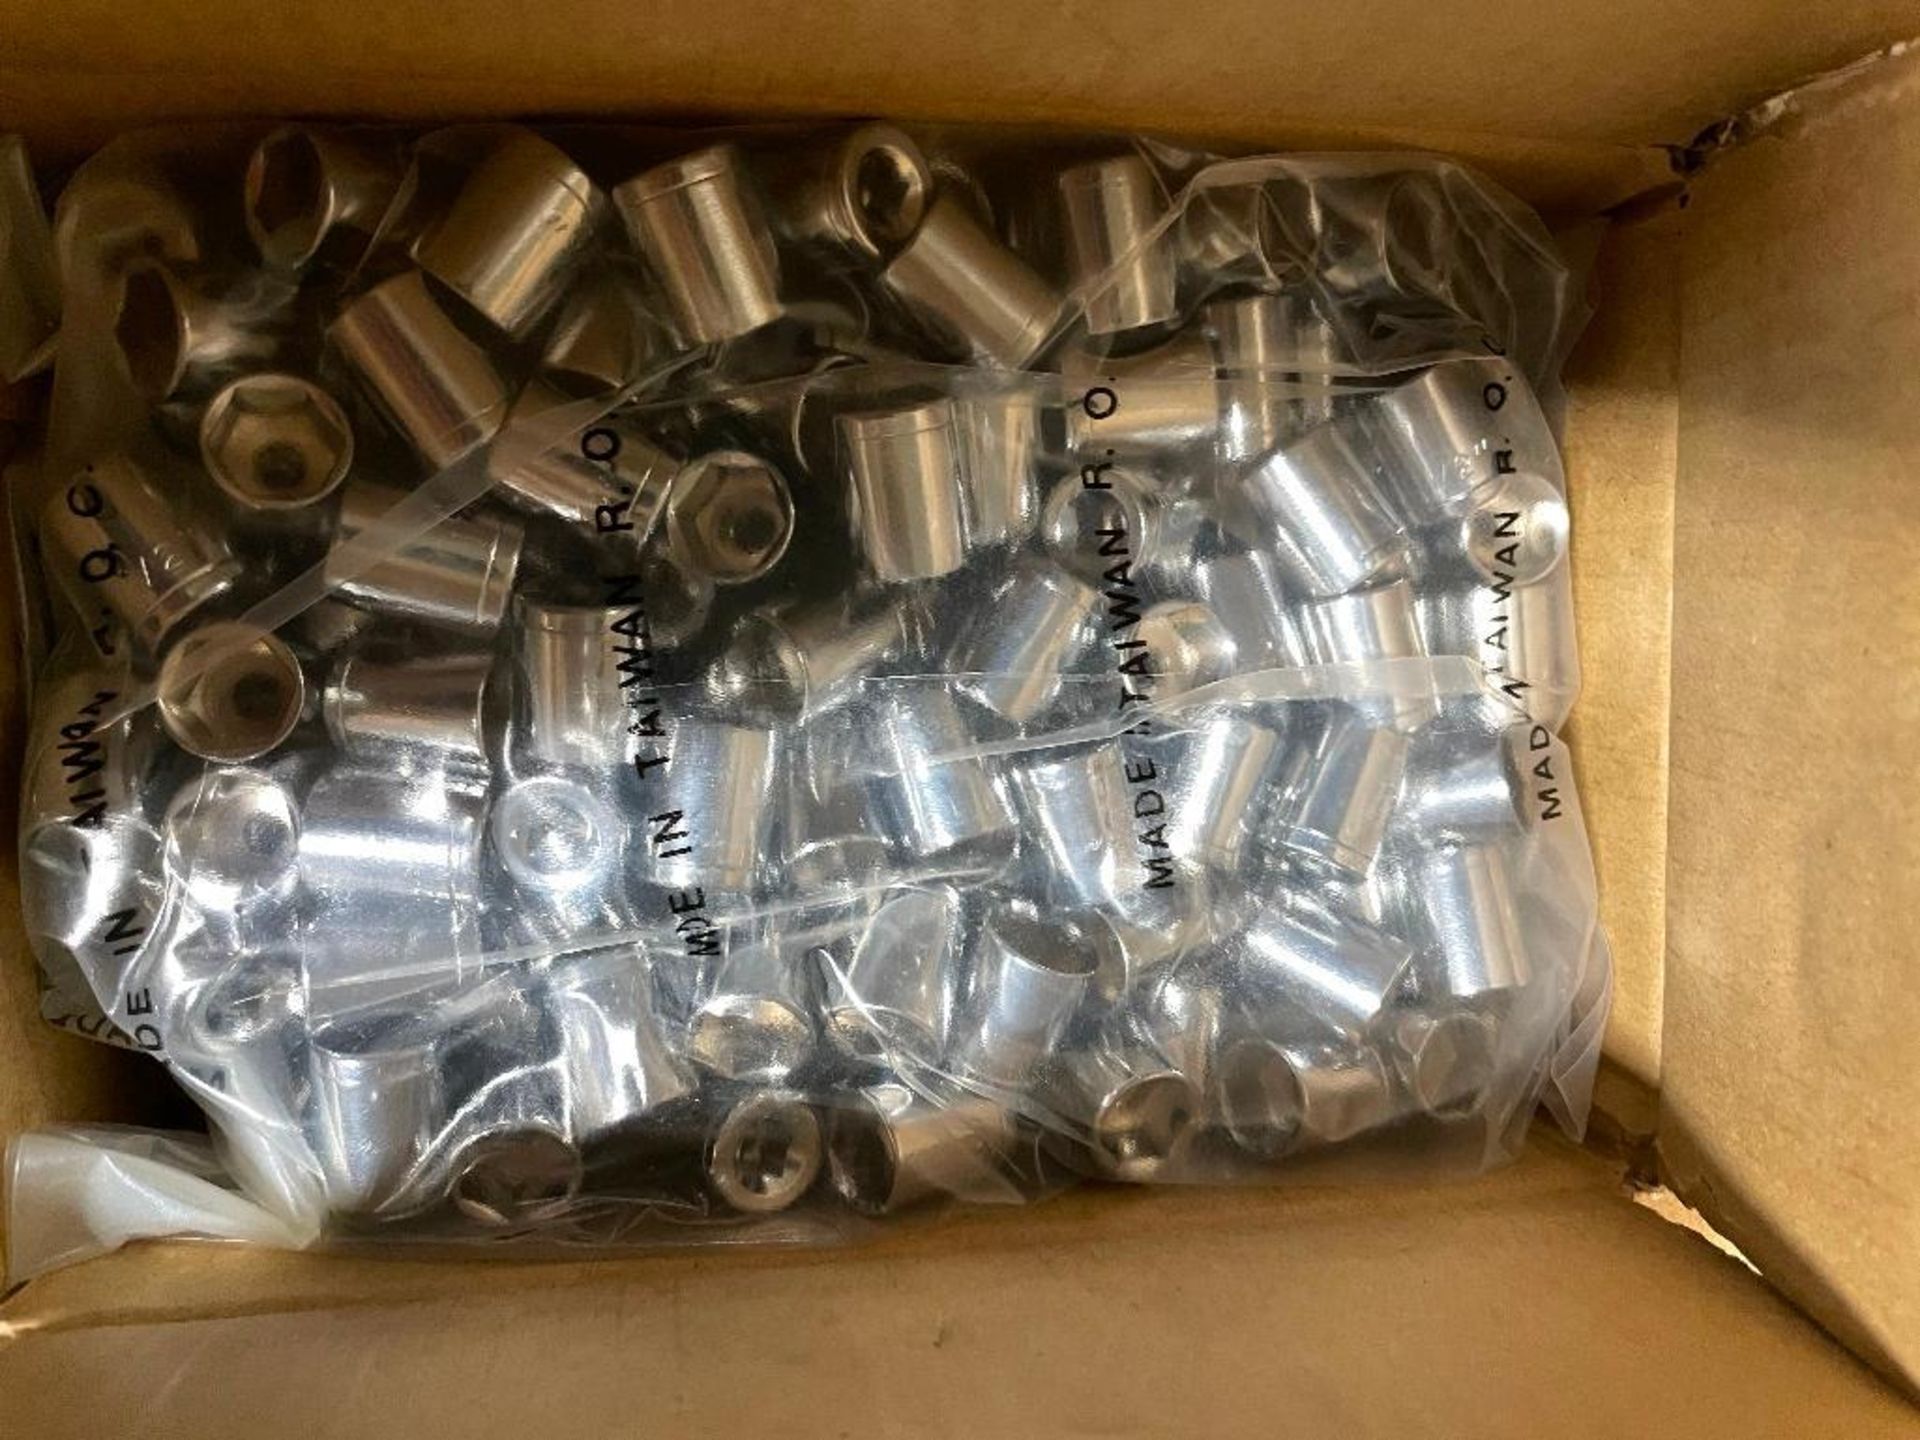 DESCRIPTION: (2) CASES OF 1/2" X 1/4" SOCKETS. 980 PER CASE. 1960 IN LOT THIS LOT IS: ONE MONEY QTY: